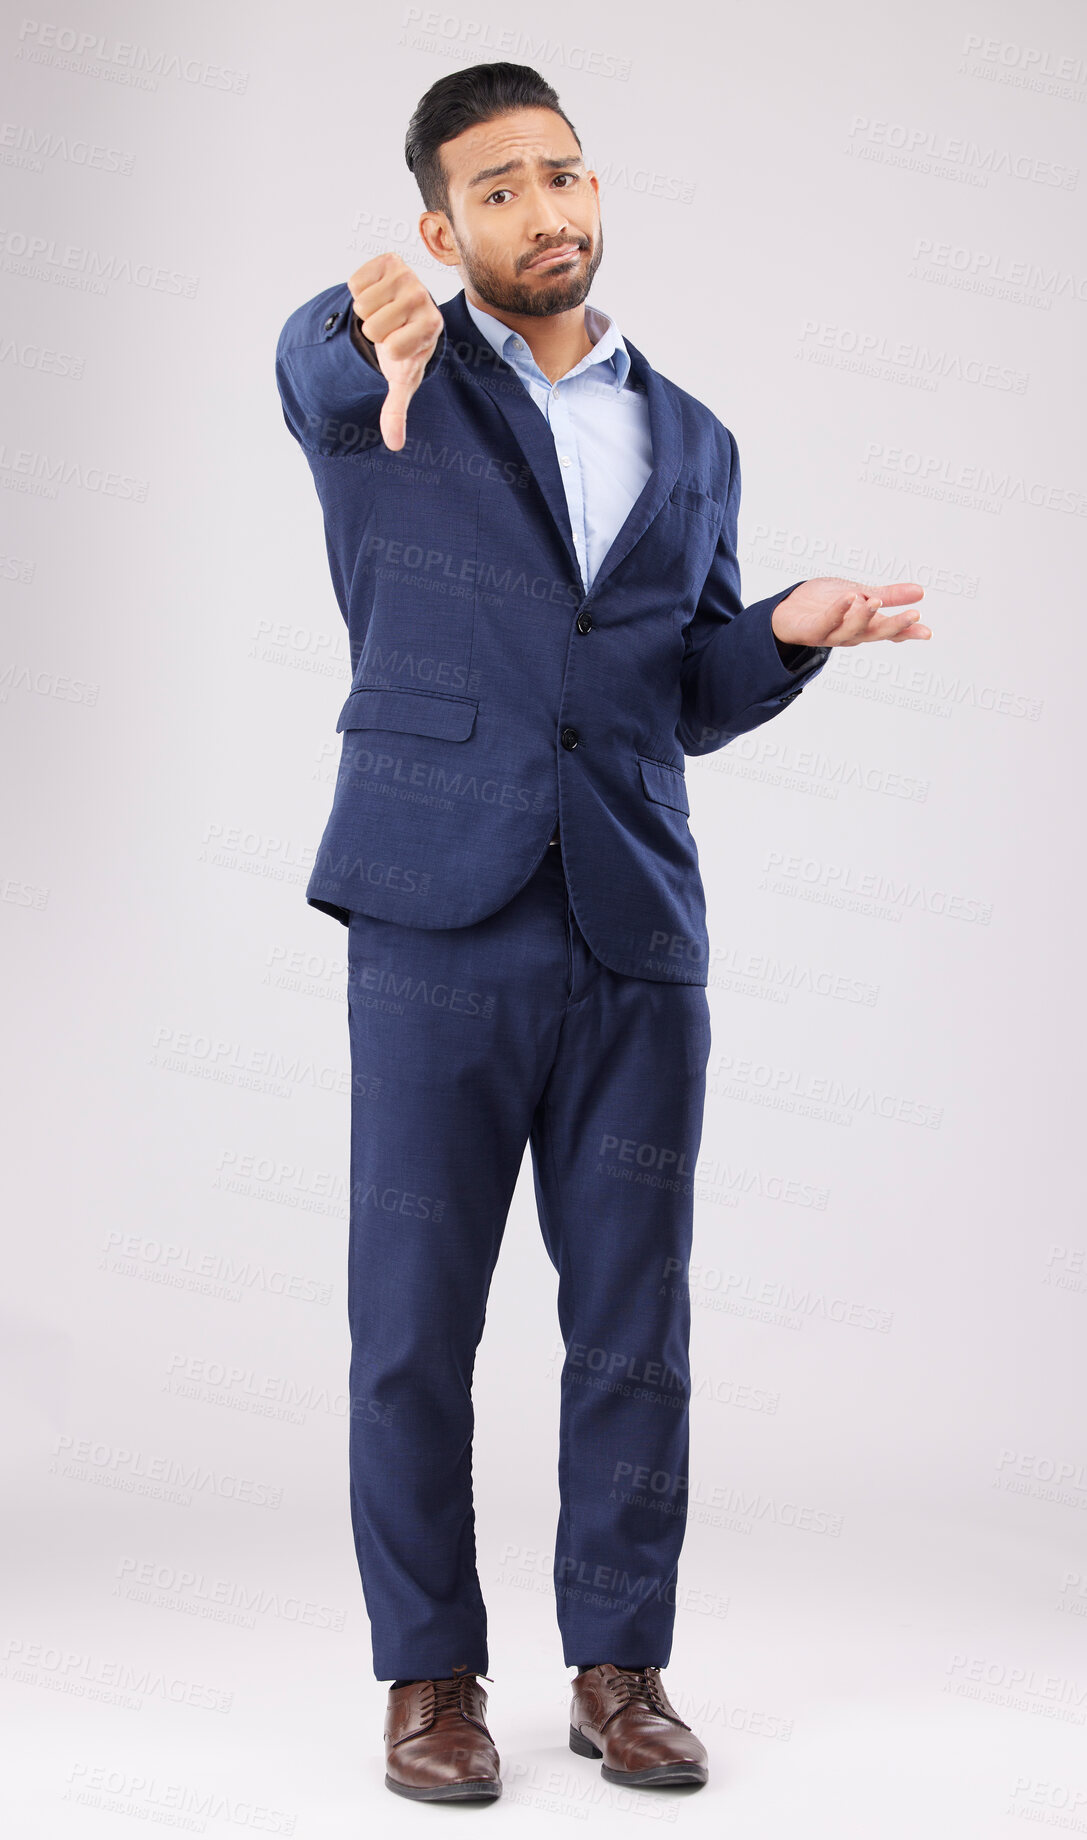 Buy stock photo Portrait, thumbs down and confused business man with negative fail sign, no opinion or decision disagreement. Bad studio service, reject vote gesture or professional person rating on white background